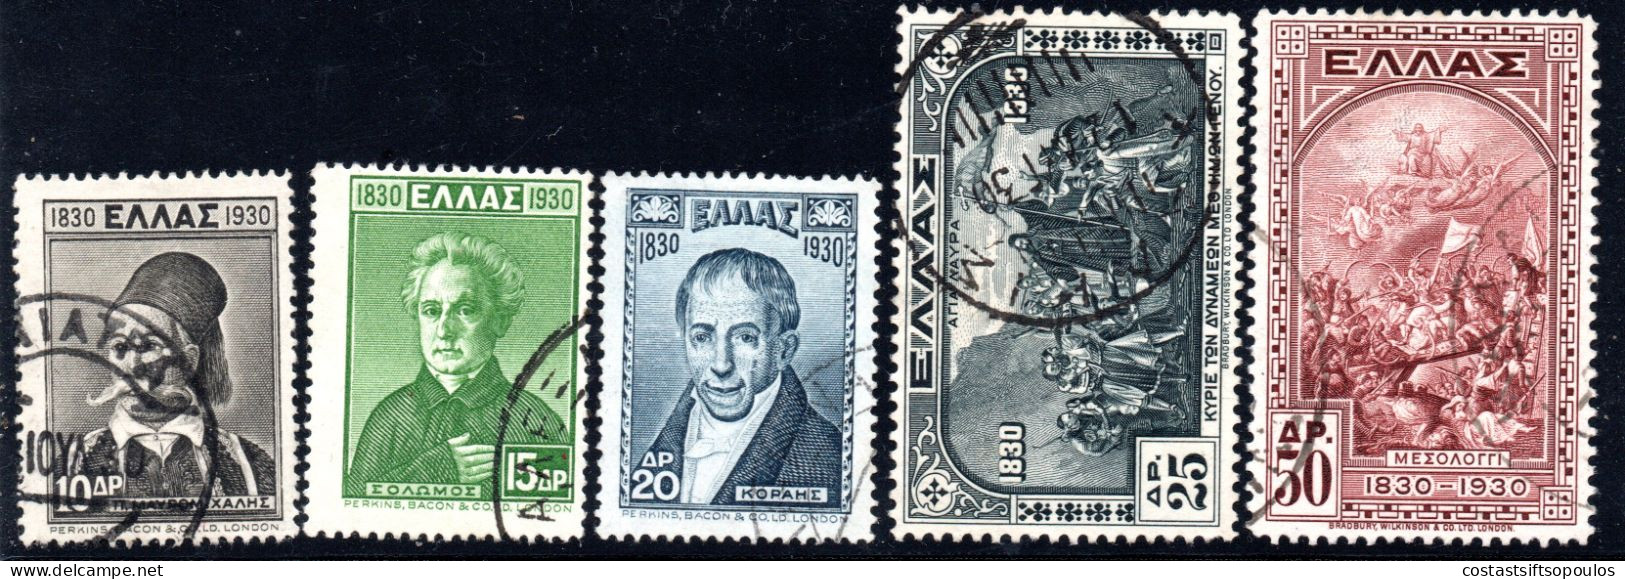 2954. GREECE.1930 INDEPENDENCE(HEROES) HIGH VALUES 10 DR-50 DR.HELLAS 504-508. - Usados